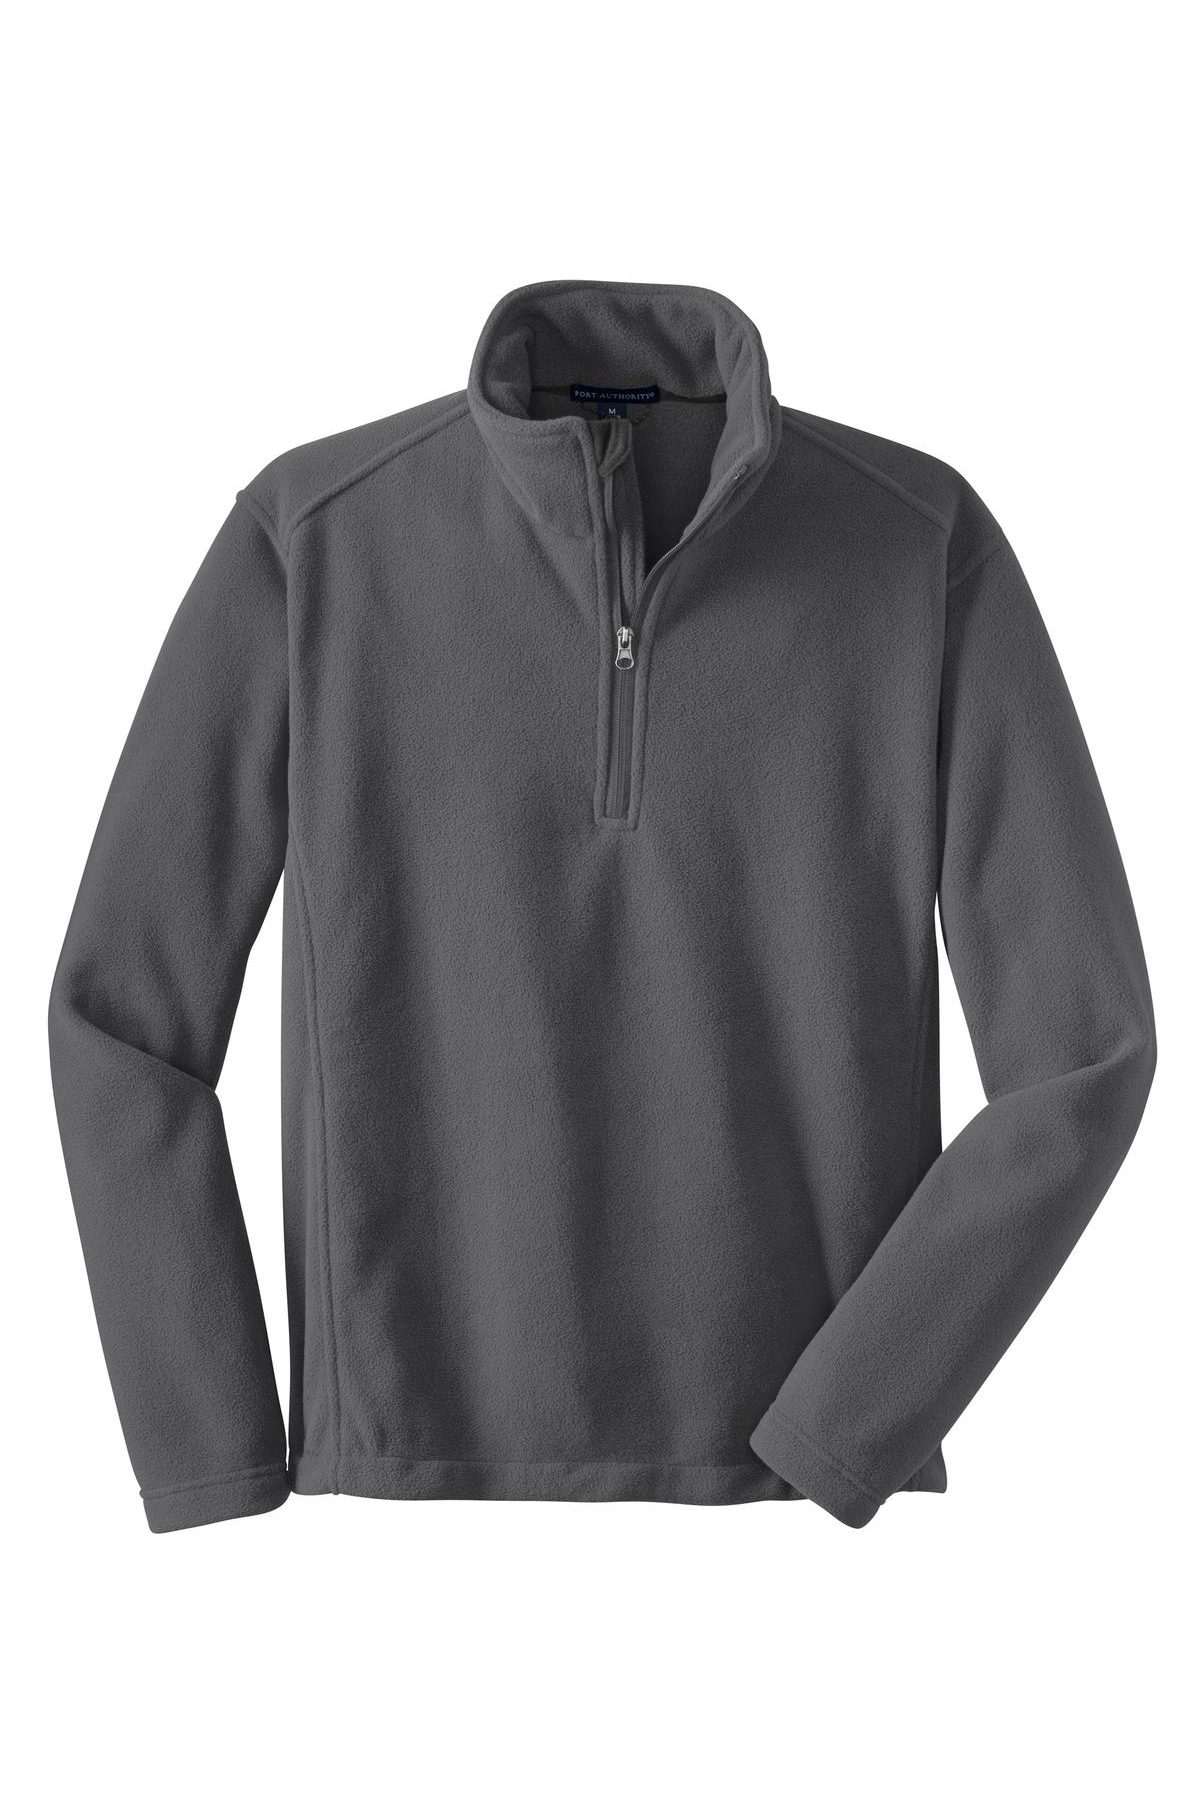 Port Authority Value Fleece 1/4-Zip Pullover | Product | Company Casuals